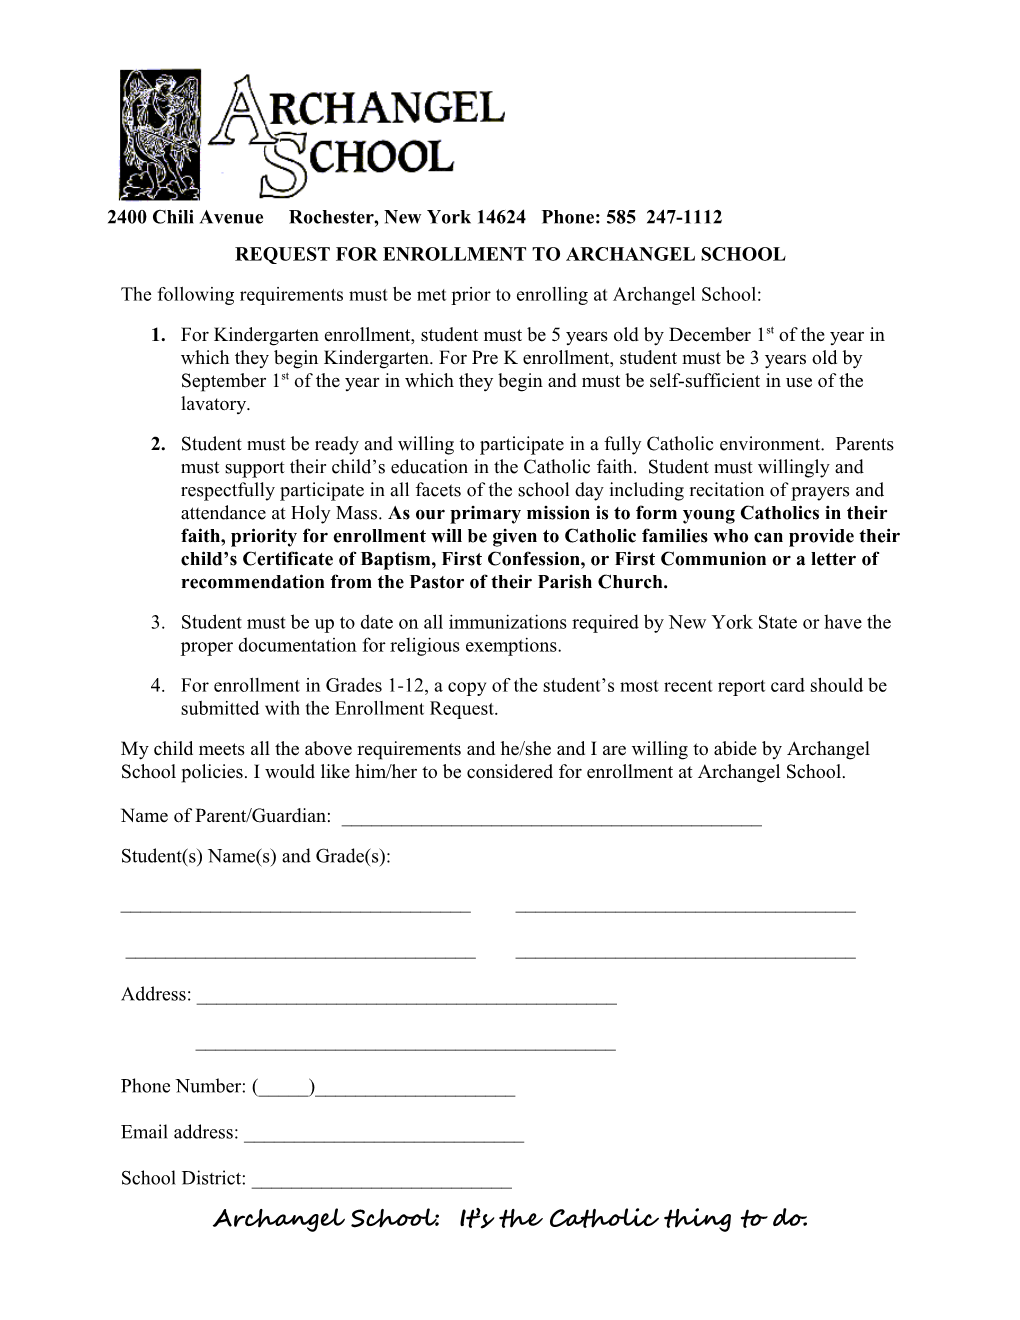 Request for Enrollment to Archangel School